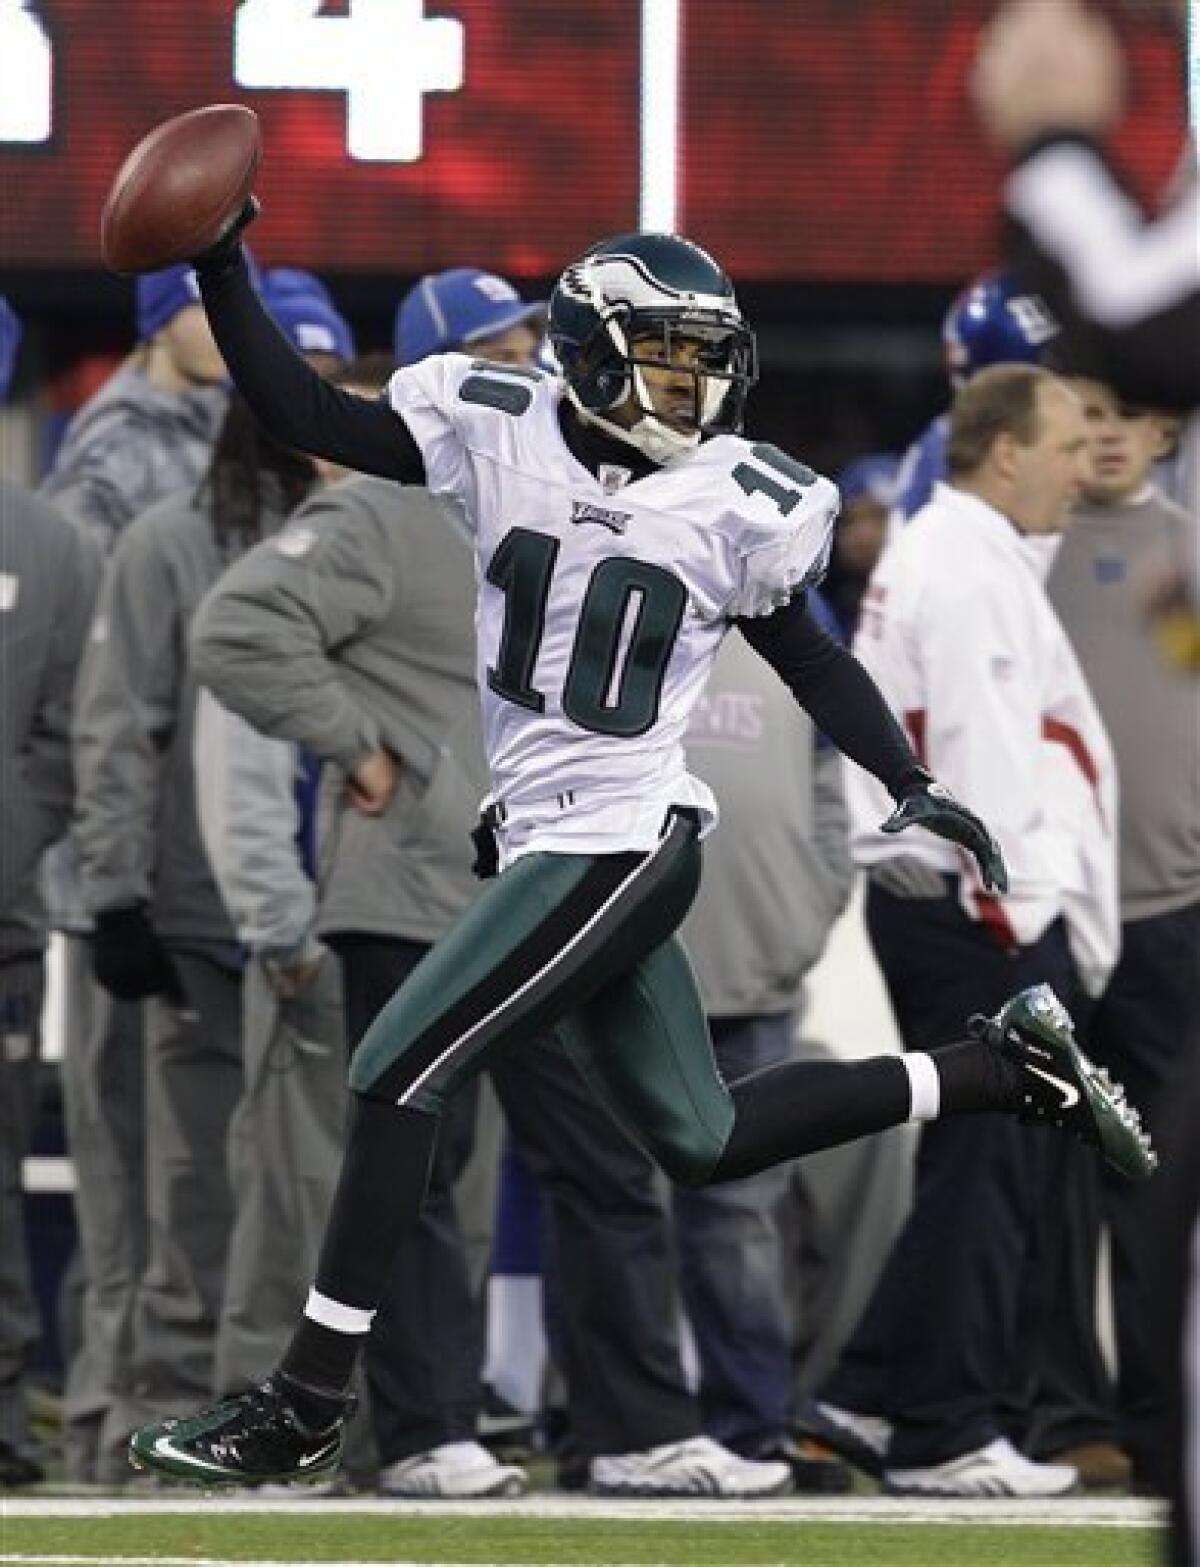 Eagles writer gives 3 reasons why the Giants will win the